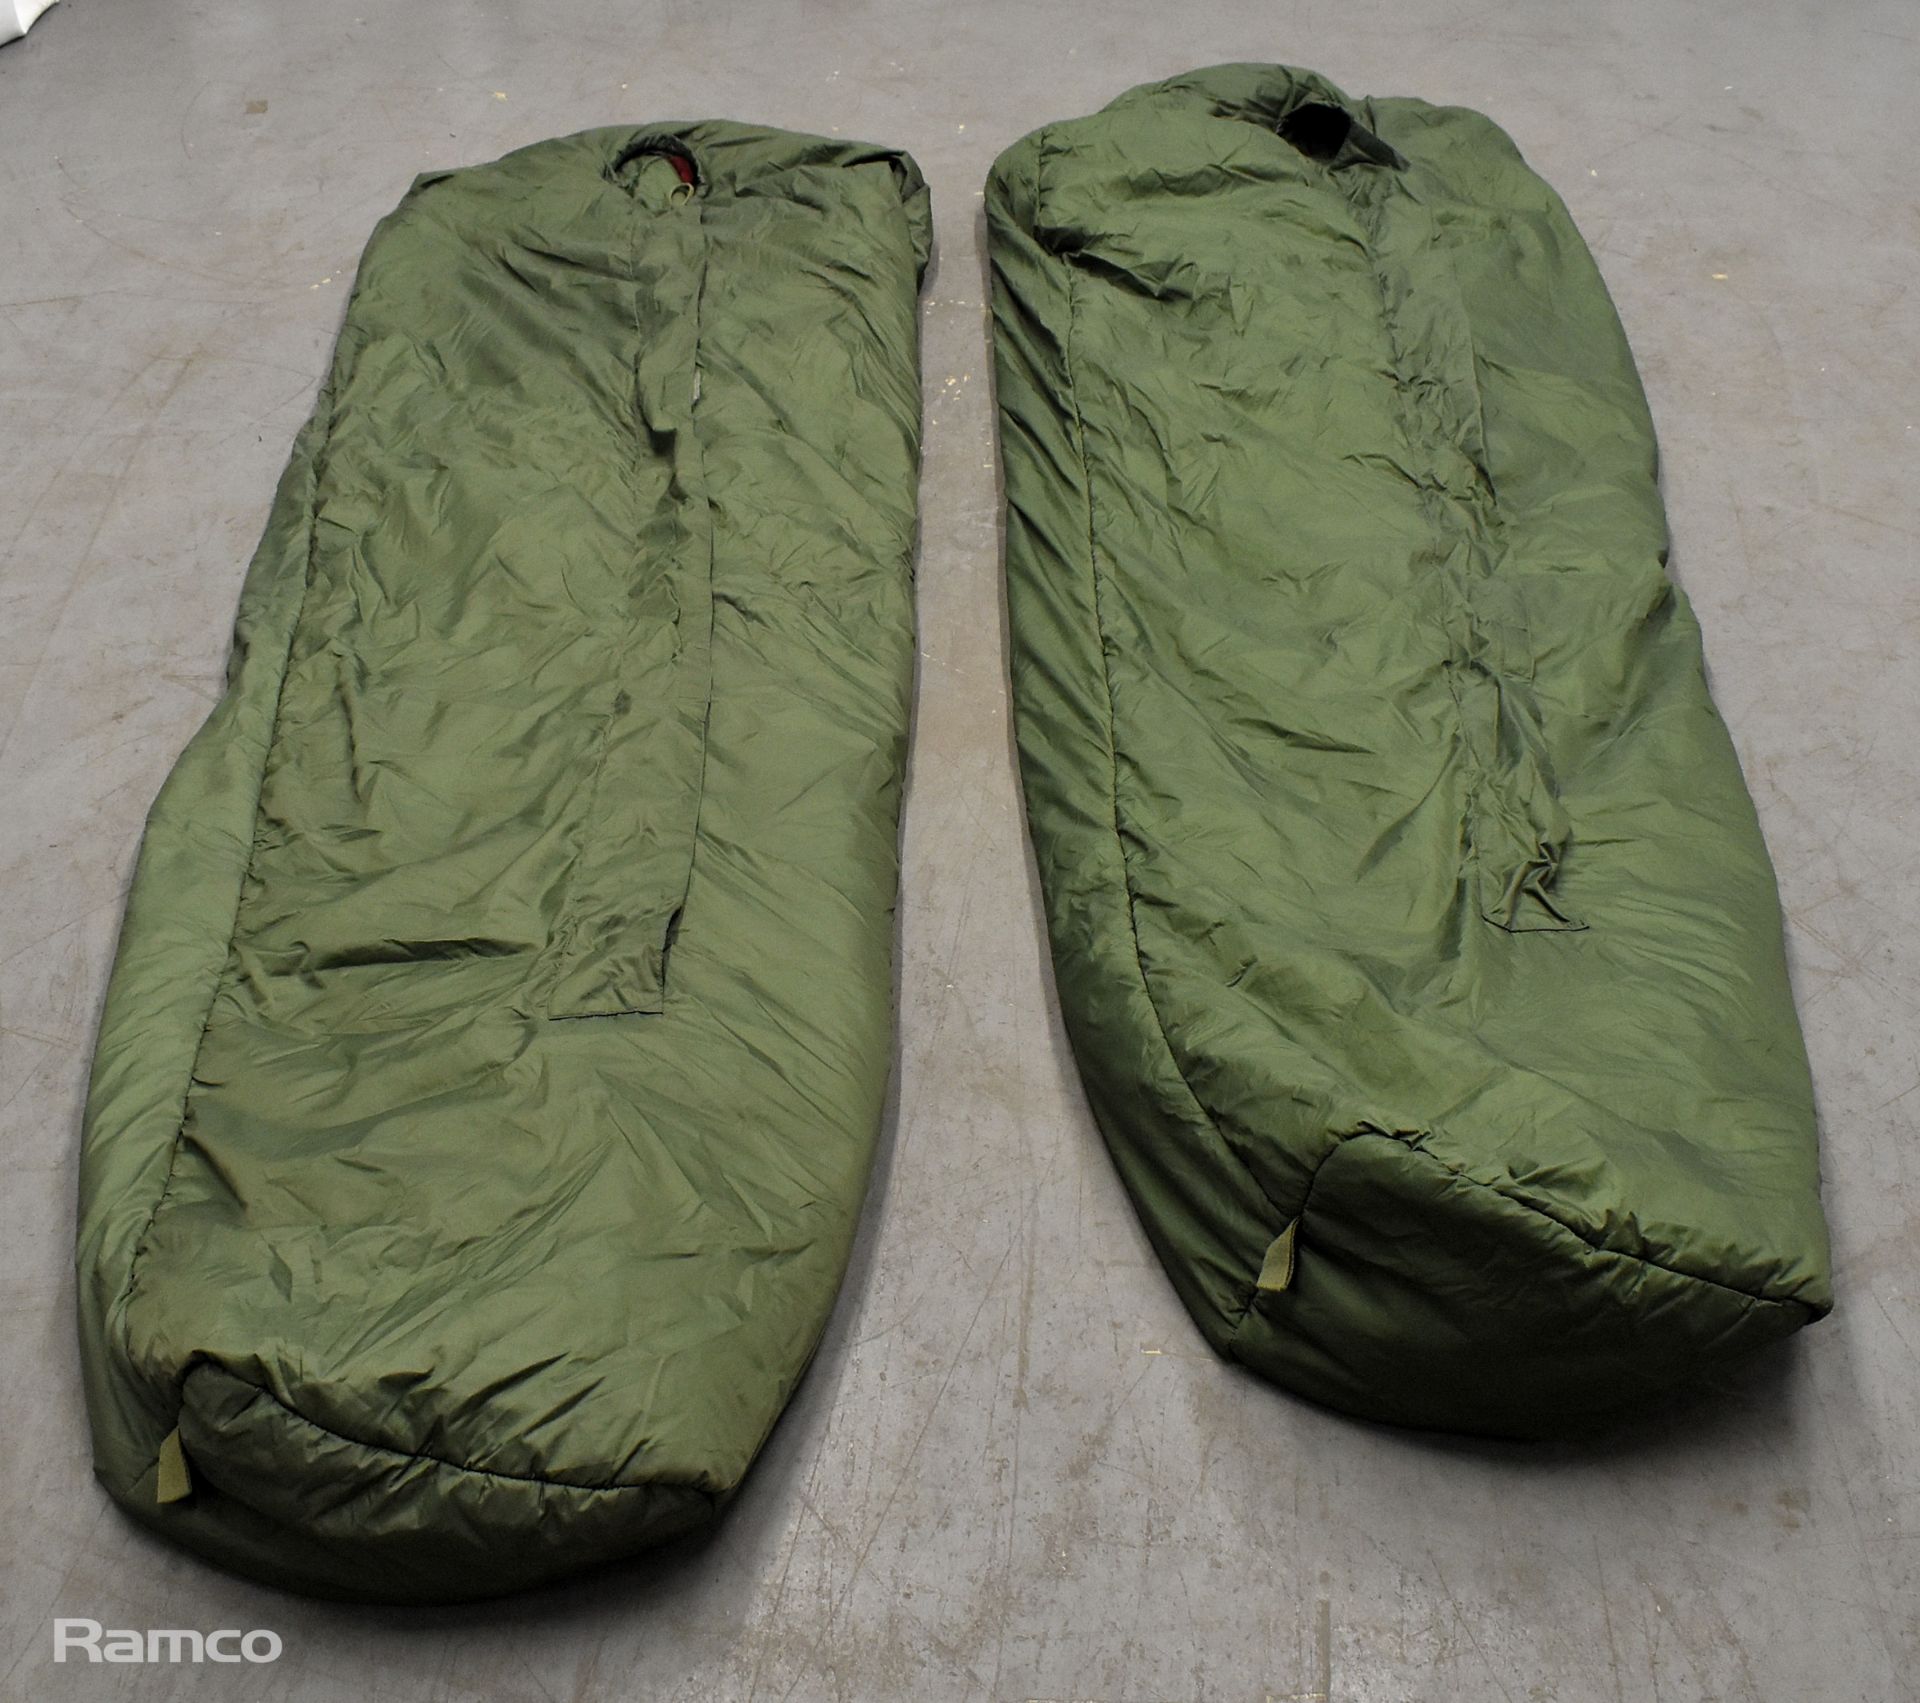 31x Sleeping bags - mixed grades and sizes - Image 4 of 8